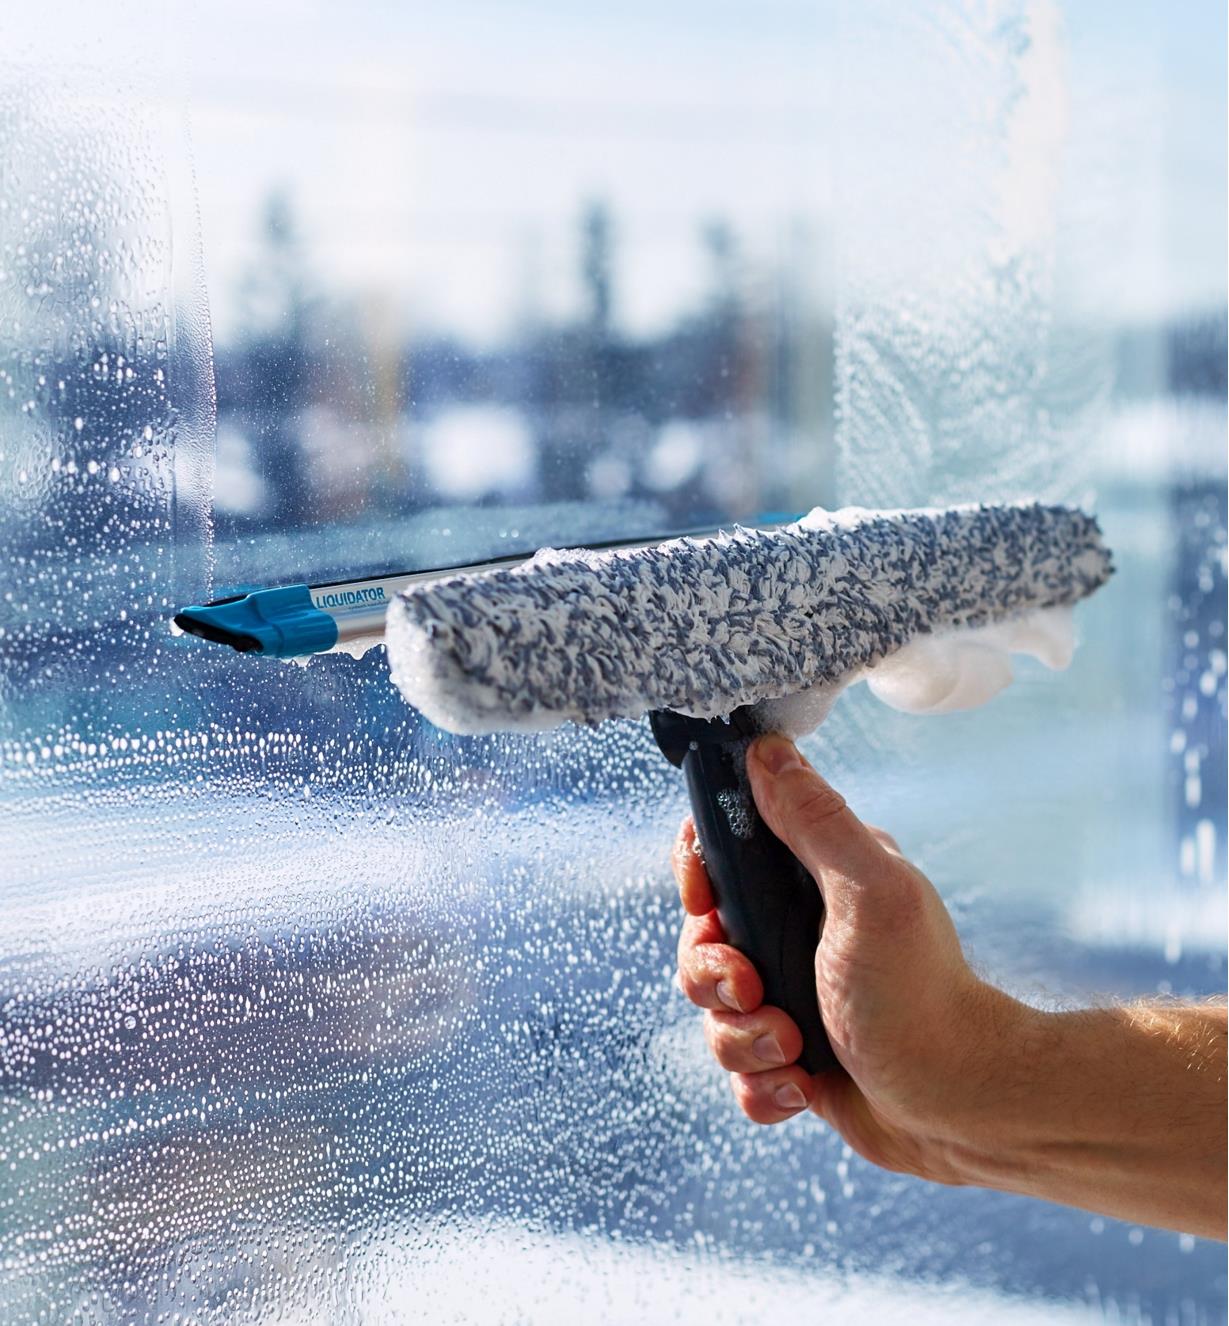 Using the squeegee side of the tool to clear soapy water from a window